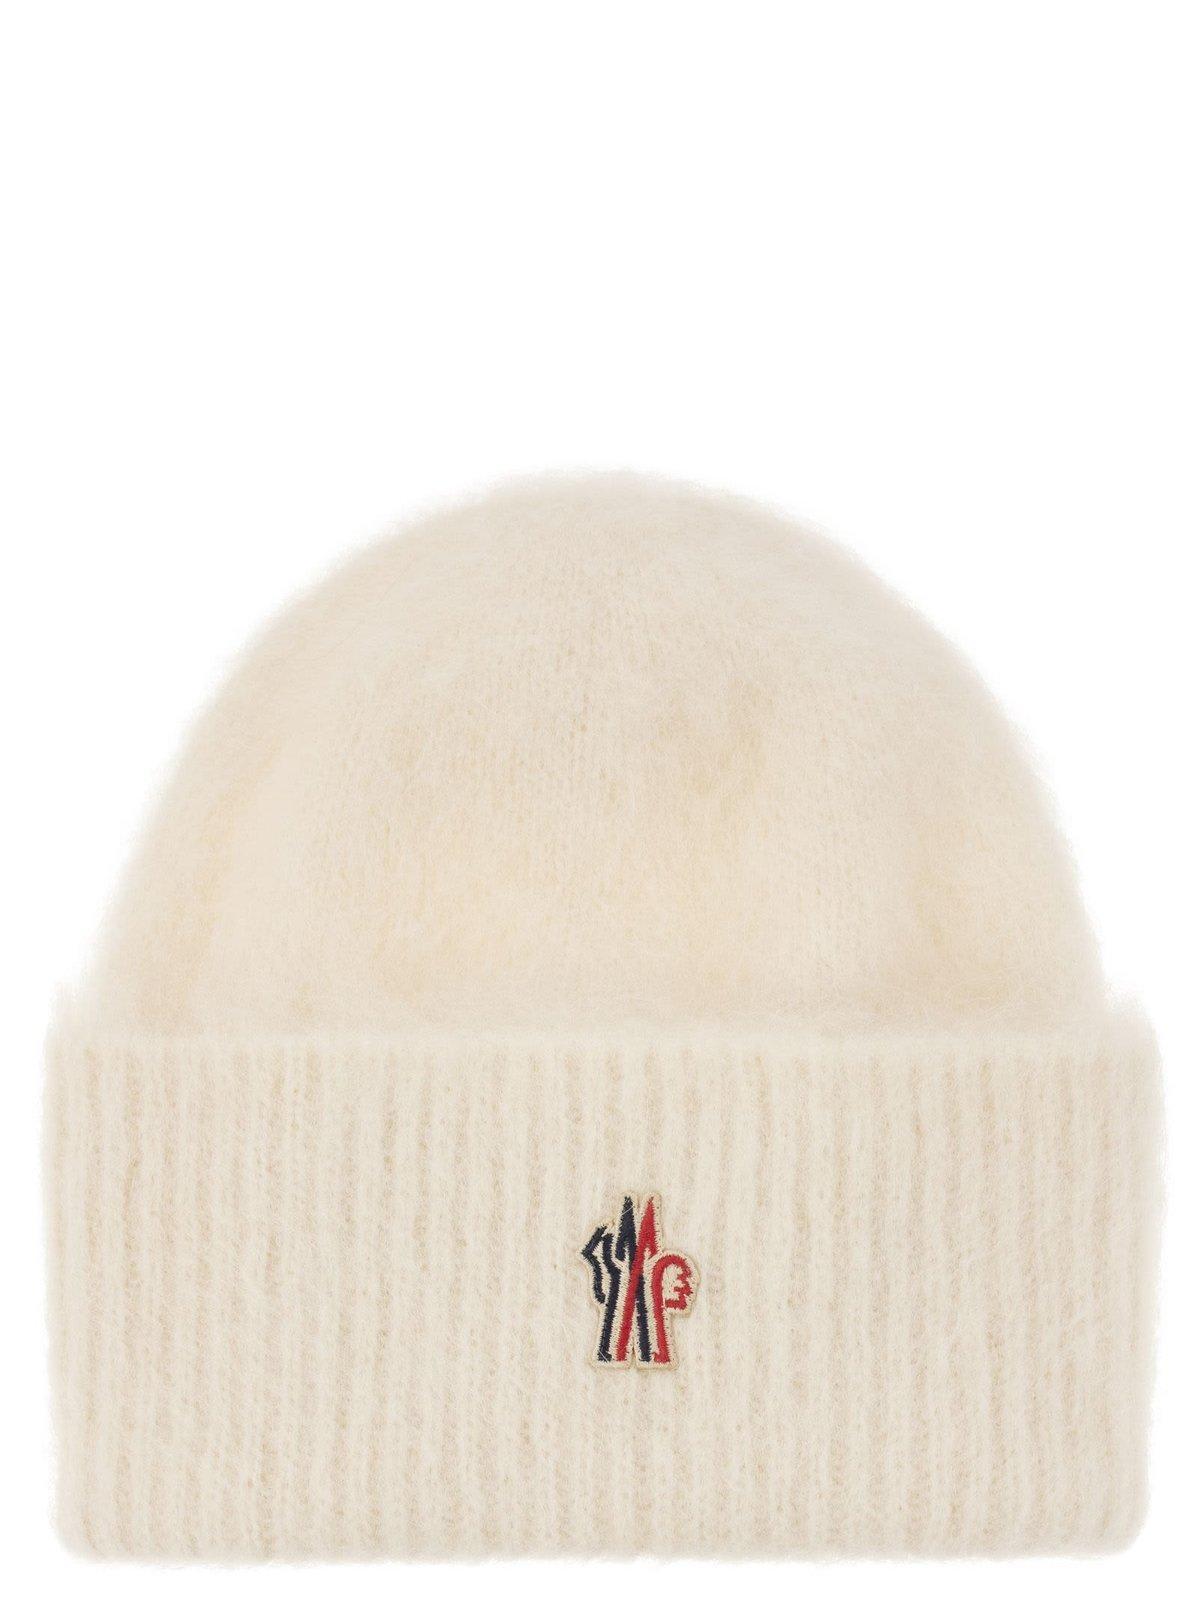 3 MONCLER GRENOBLE Logo Embroidered Beanie in Natural | Lyst